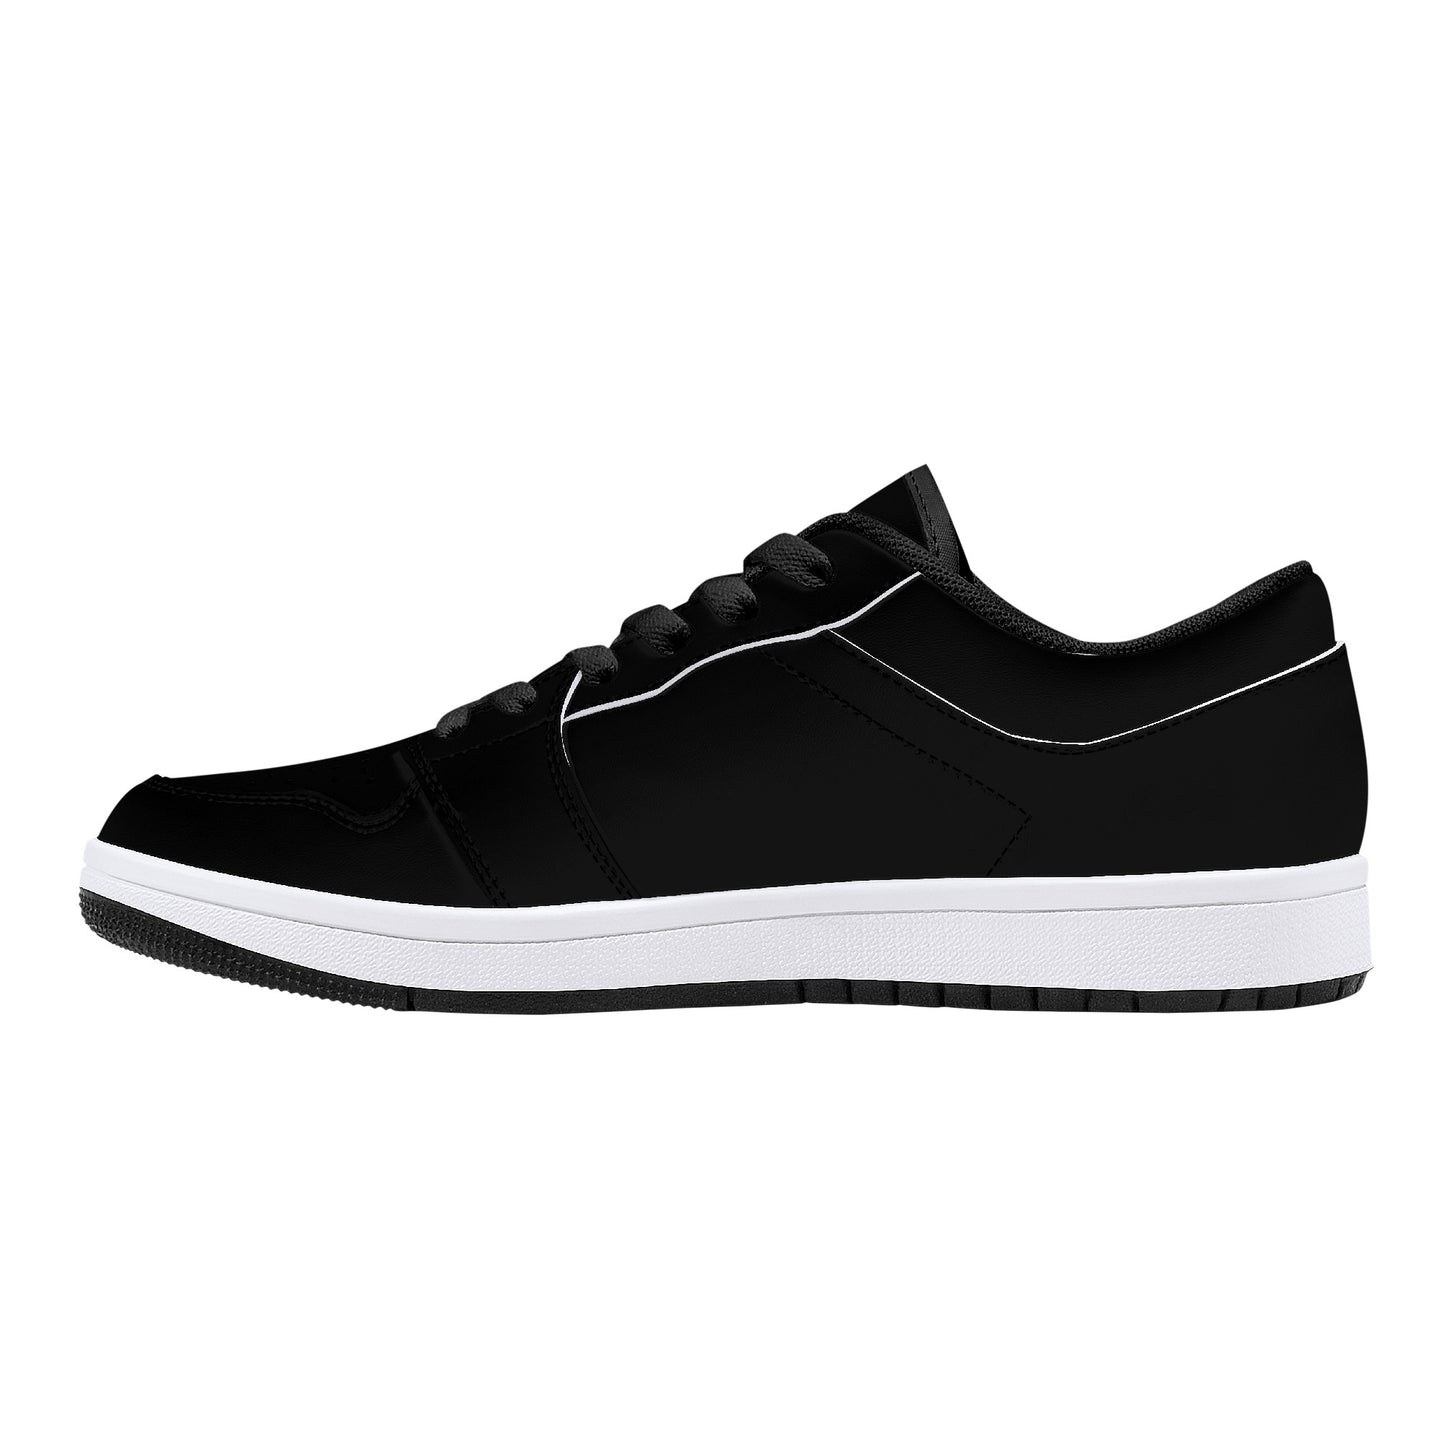 Leather Sneakers - Black Beauty Collection